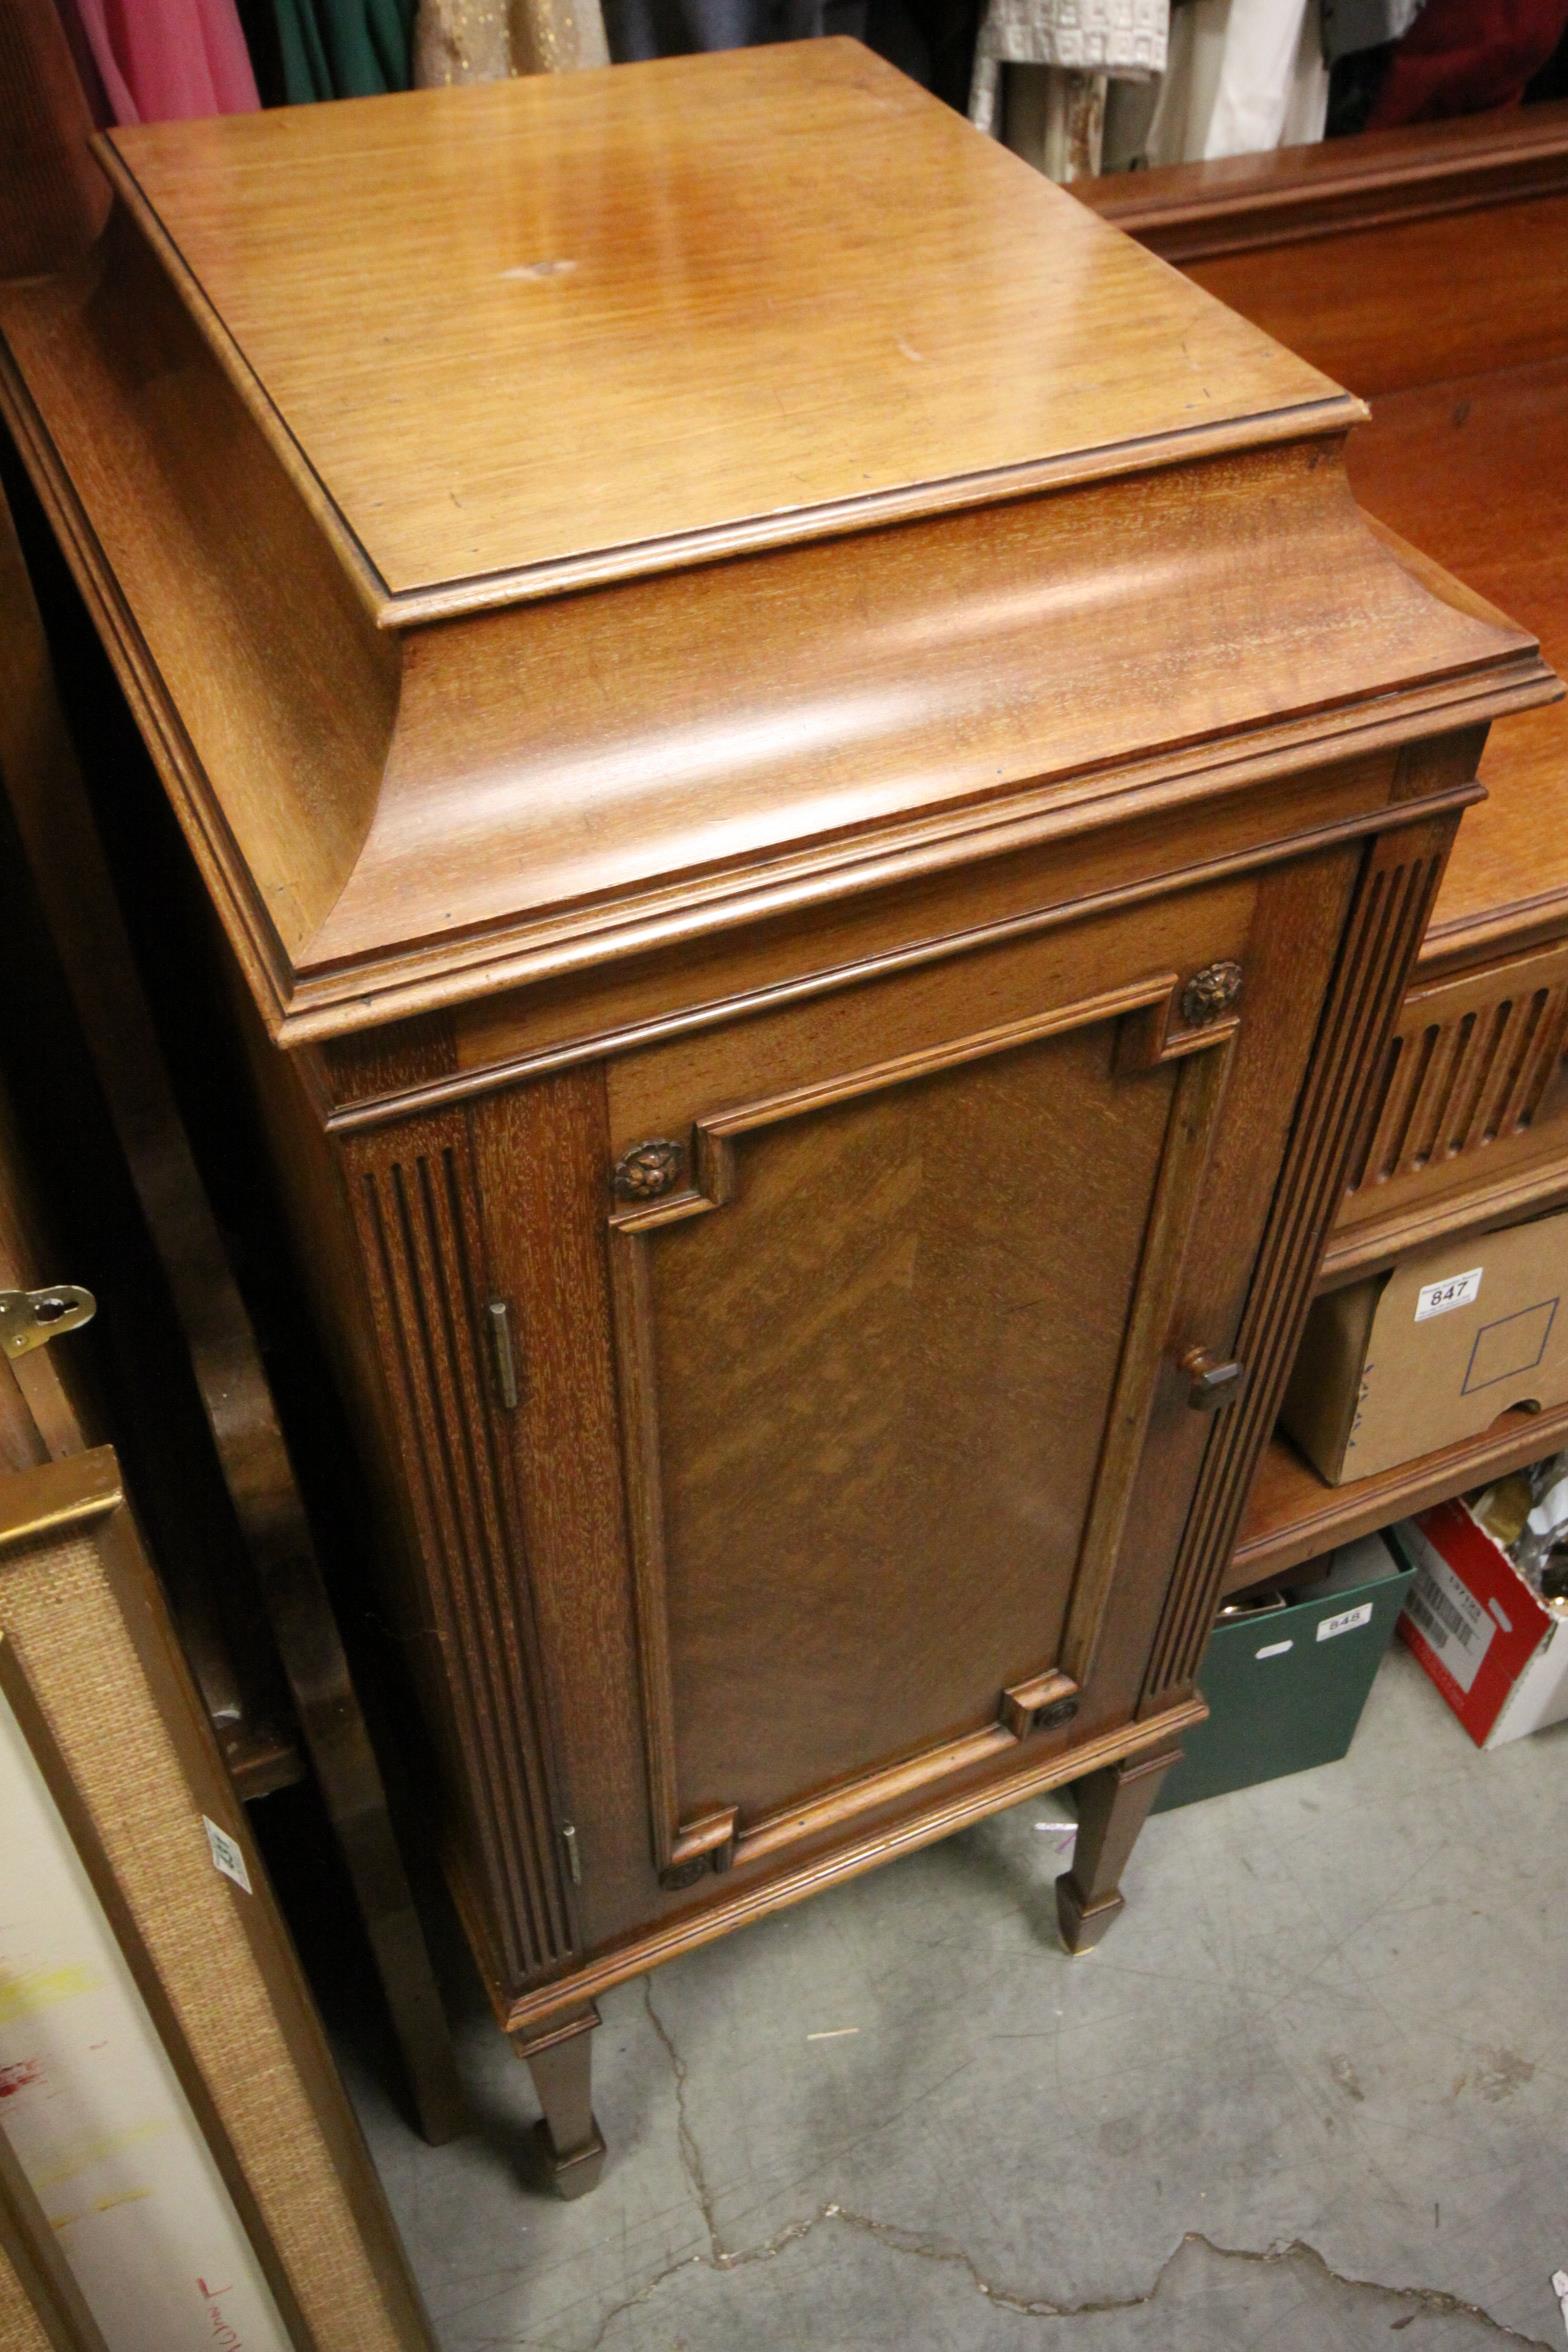 Victorian Mahogany Pedestal Sideboard with central drawer over a shelf flanked by two pedestals - Image 4 of 7